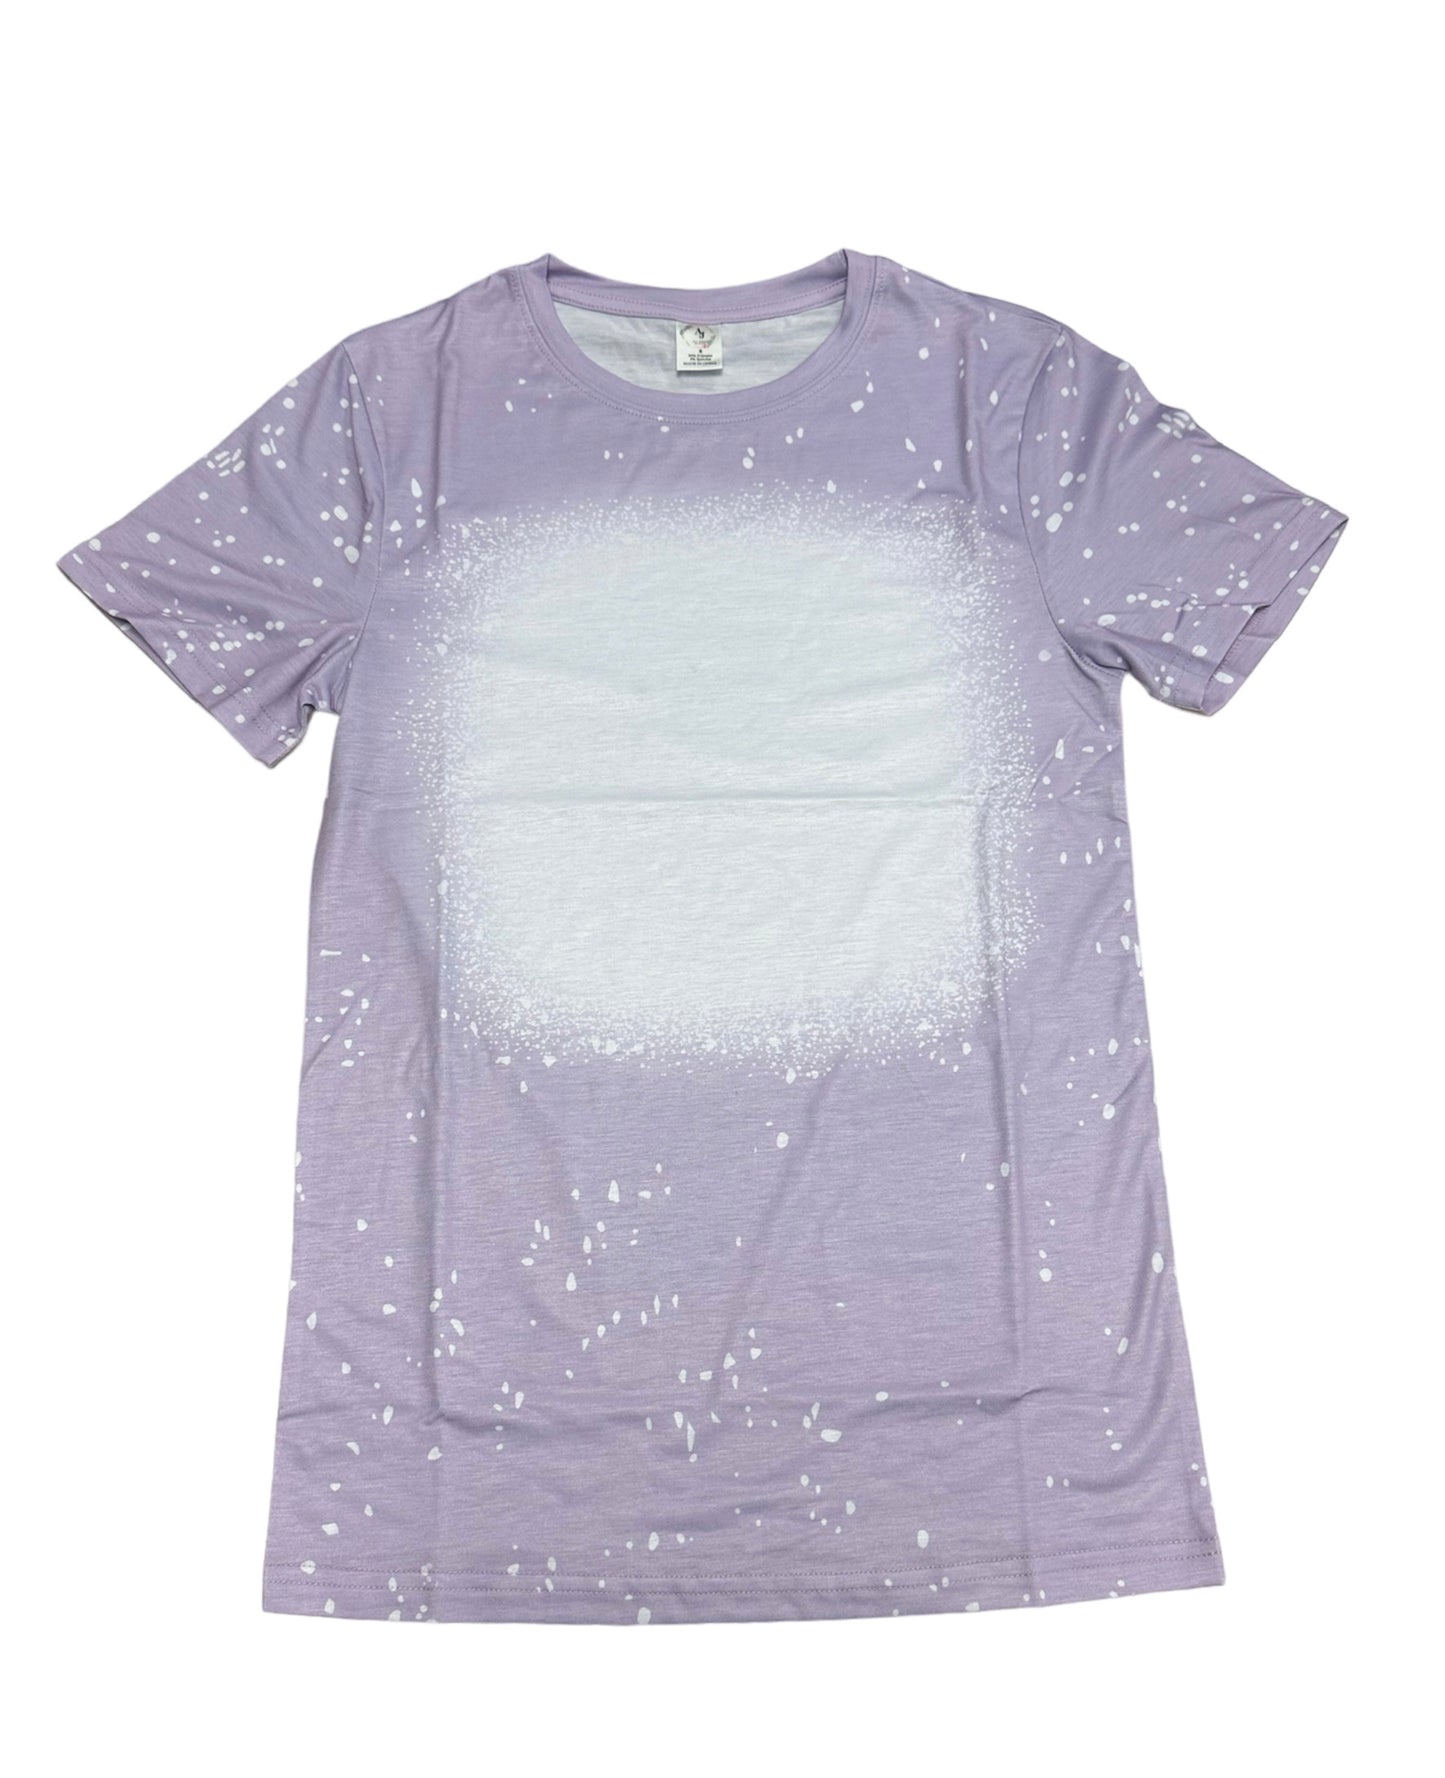 Spring Faux Bleached Adult Unisex Shirts